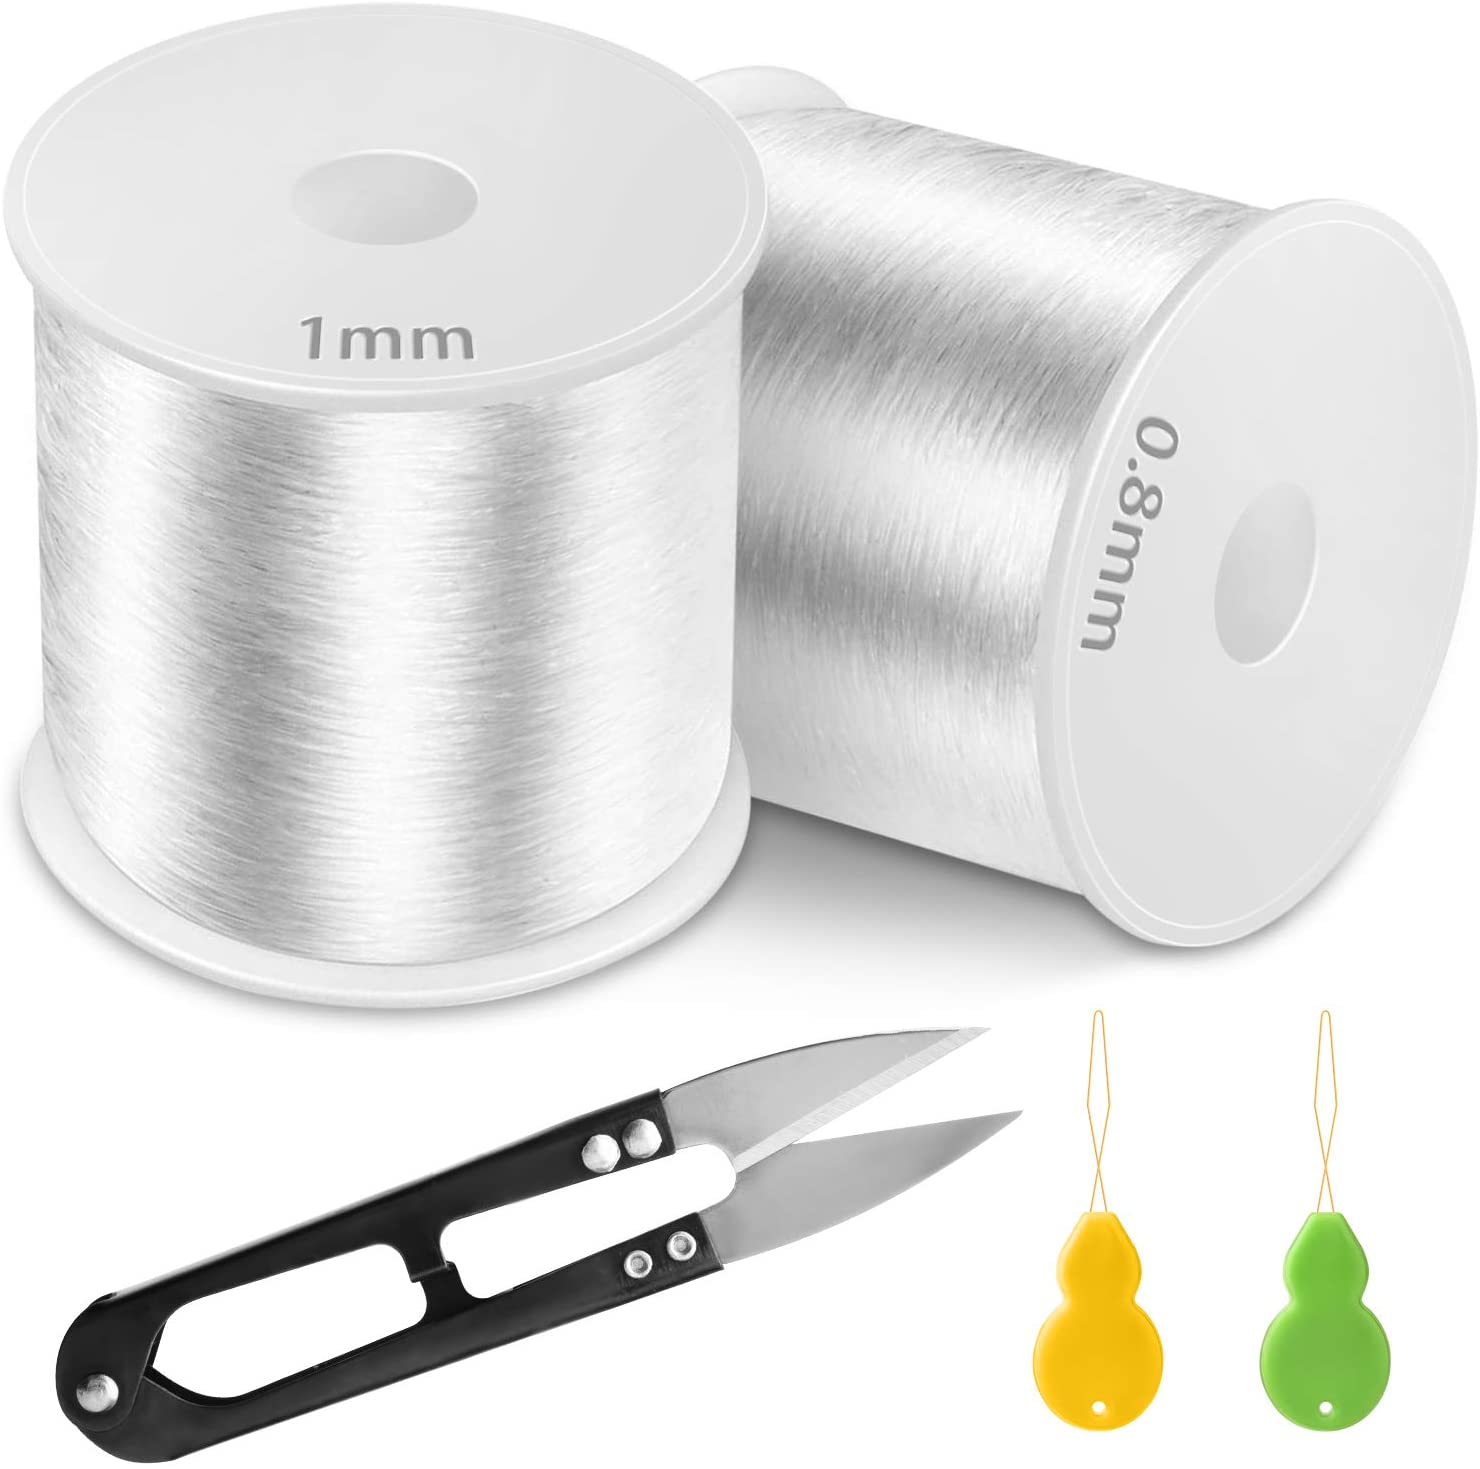 MENKEY Elastic String for Bracelets, 820 Feet Clear Stretchy String for  Jewelry Making with Thread Clippers and 2PCS Threaders (0.8mm, 1mm) 